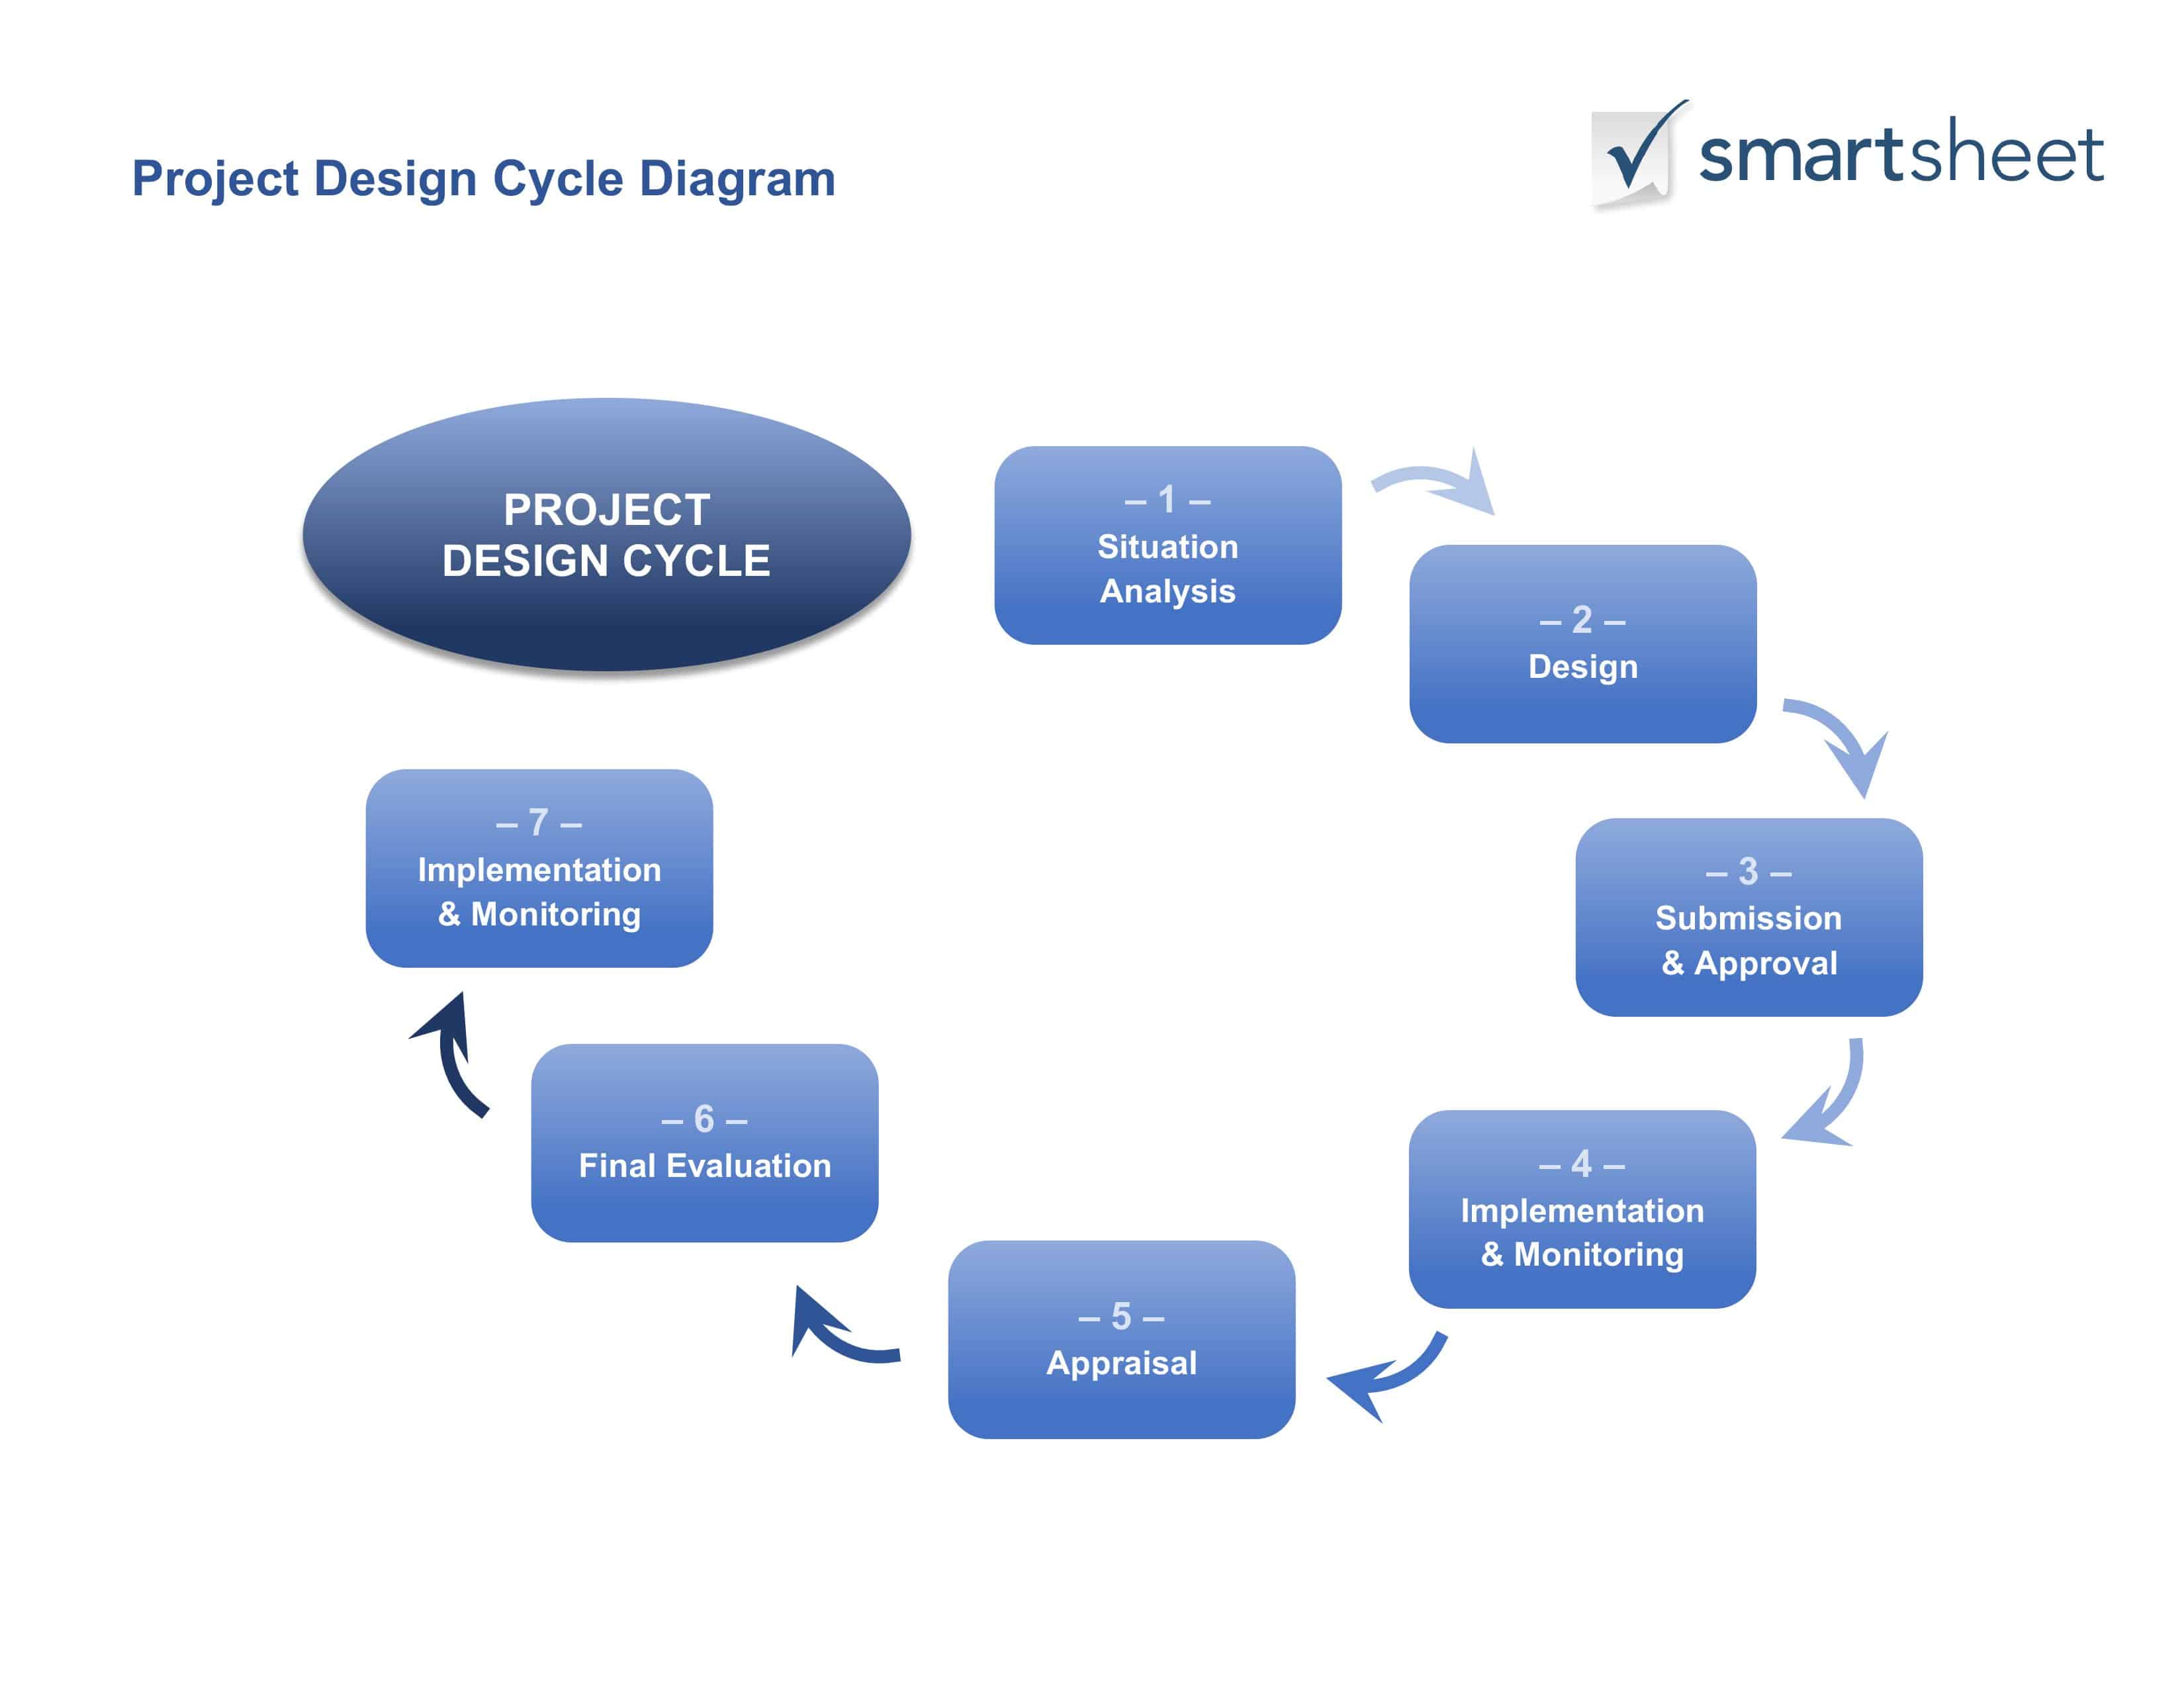 Project Design Cycle Diagram